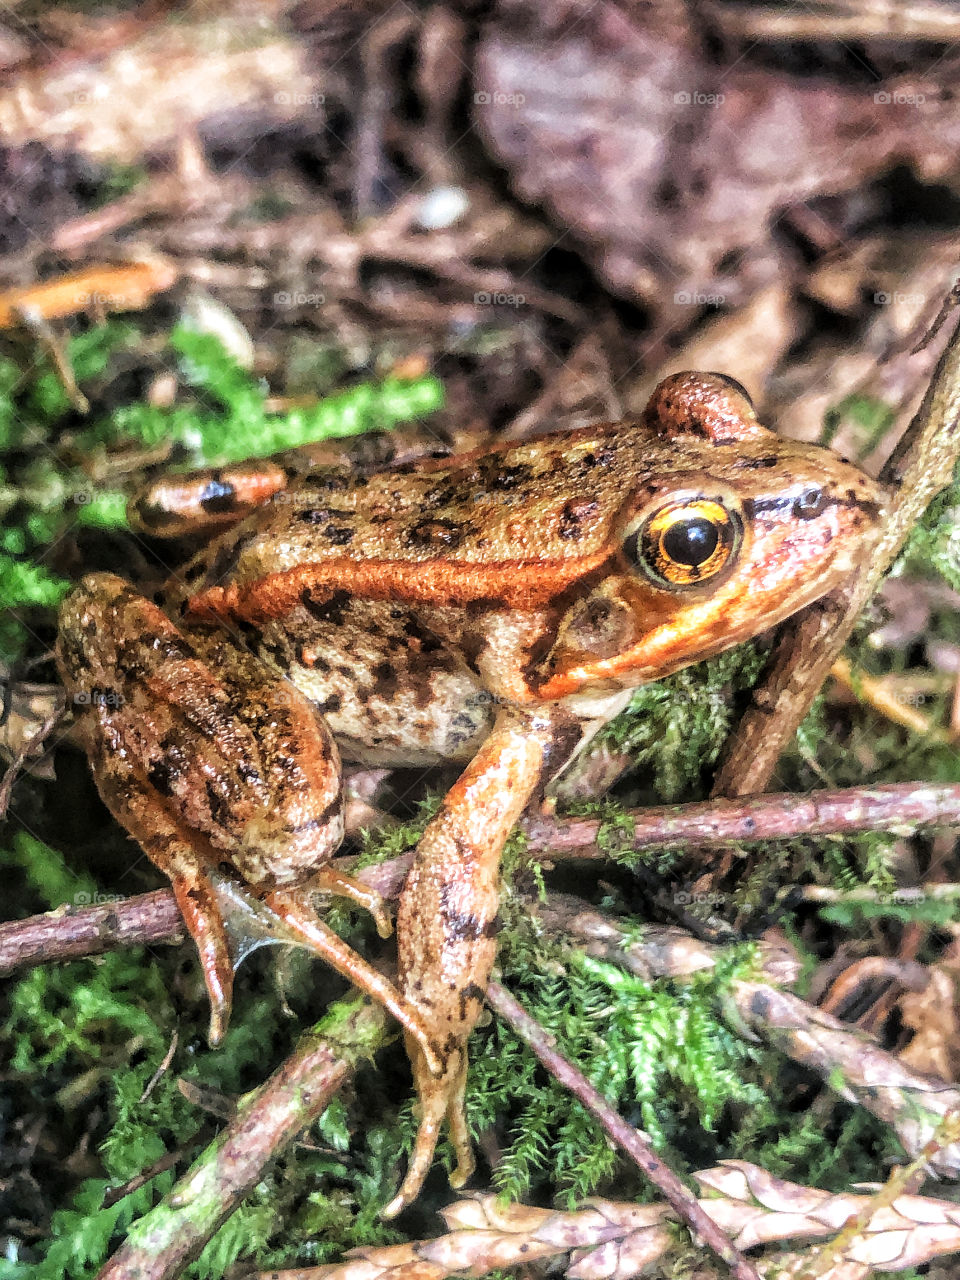 Detailed close up of colourful Oregon spotted frog on BC Canada west coast mossy forest floor.